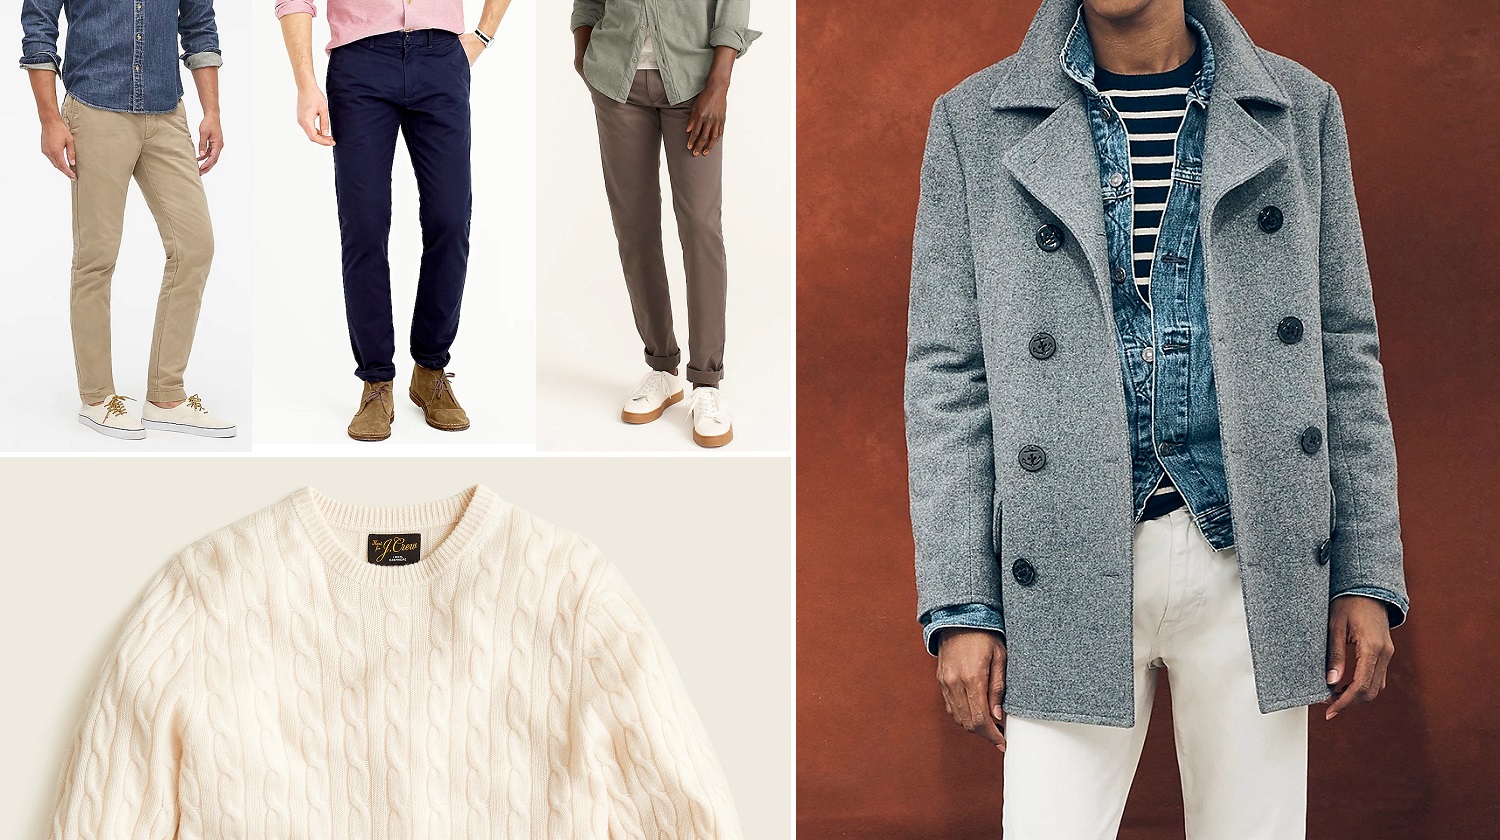 Steal Alert: Even More New Items added to J. Crew’s Sale + New Reductions